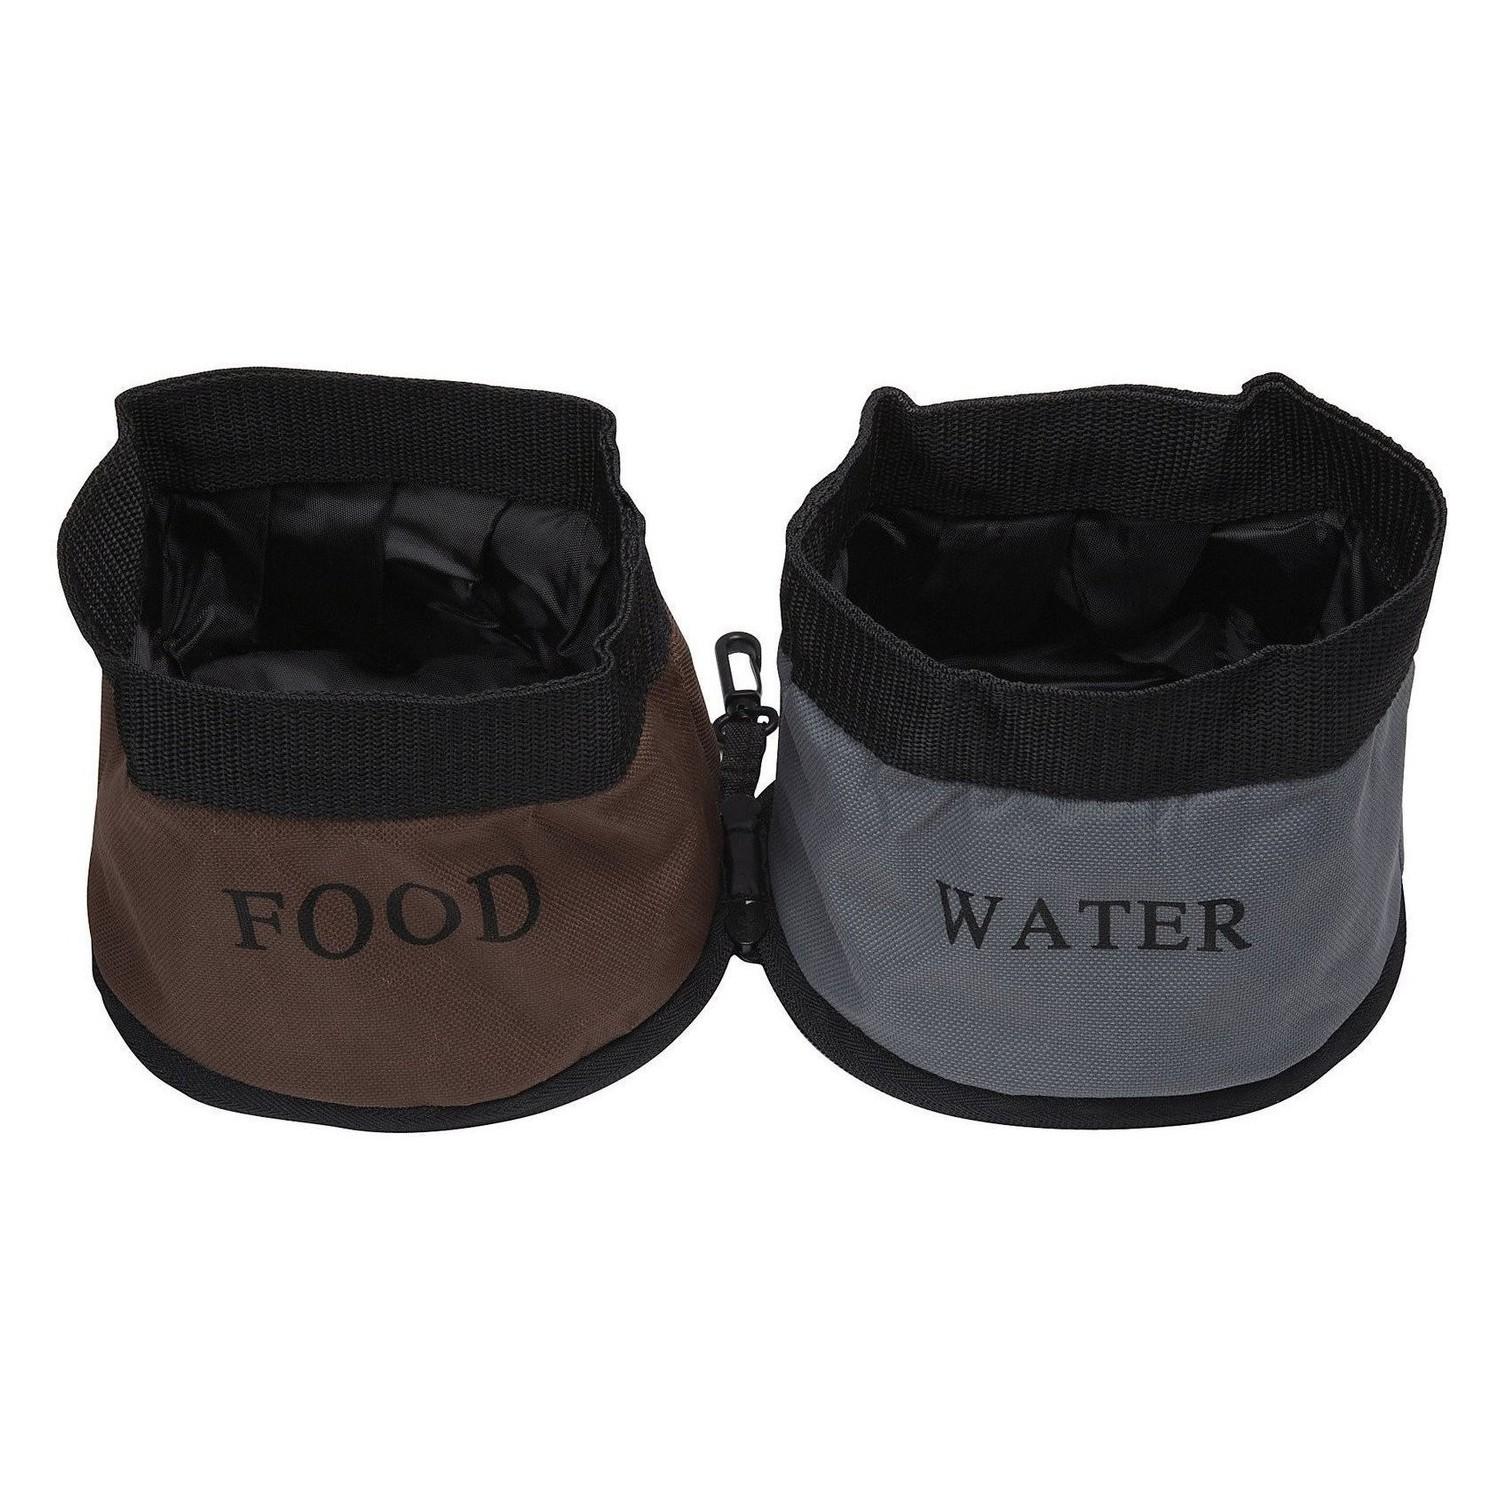 Pet Life Dual Folding Food and Water Collapsible Cat and Dog Bowl - Camouflage